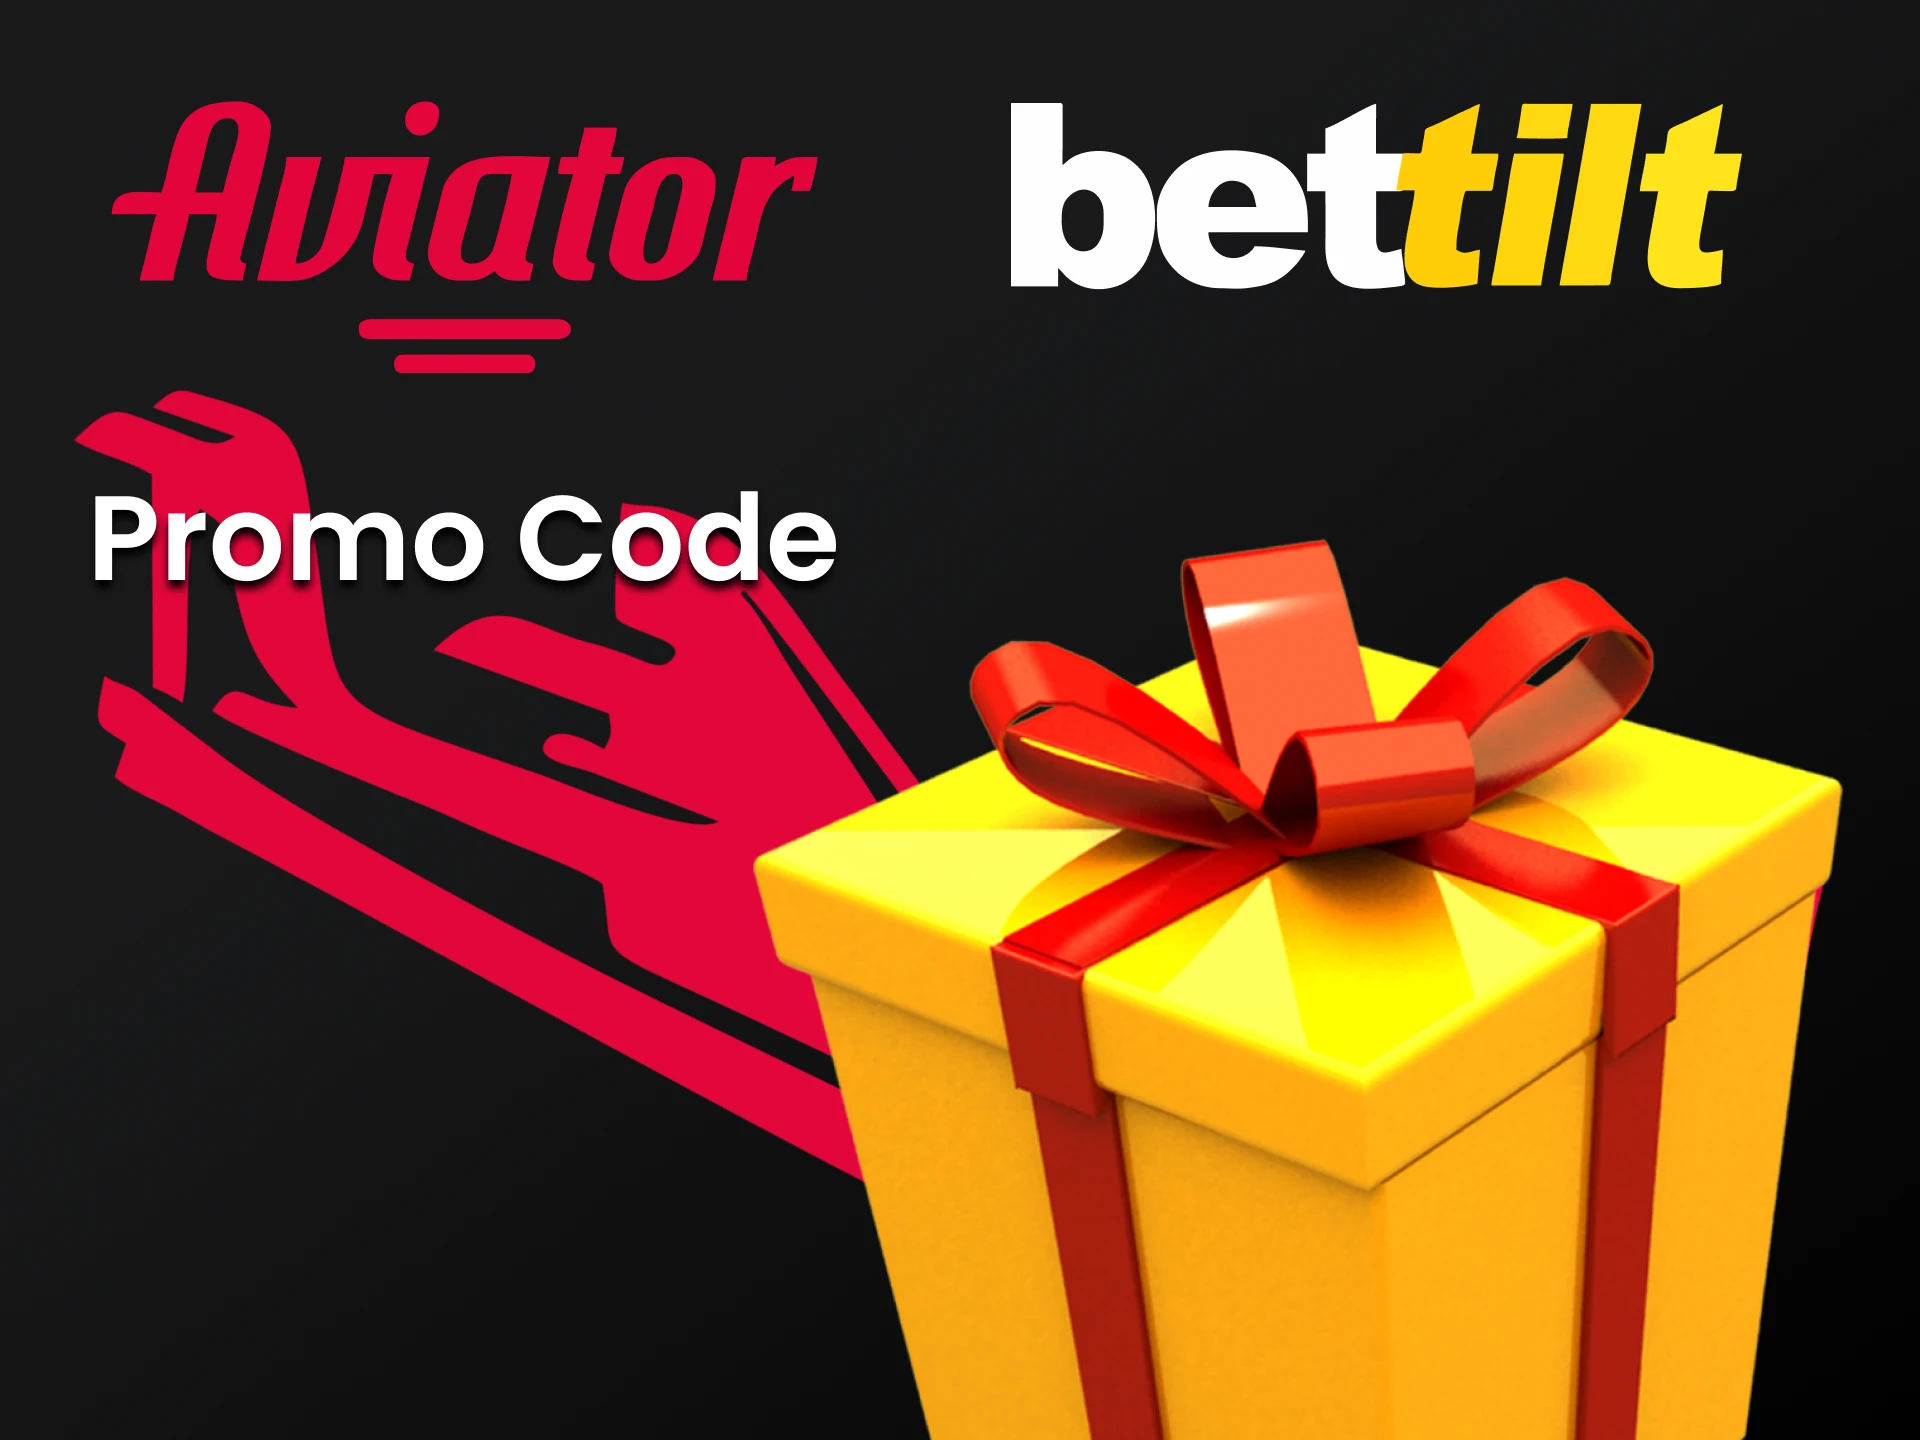 By entering a promo code you get a bonus for the Aviator from Bettilt.